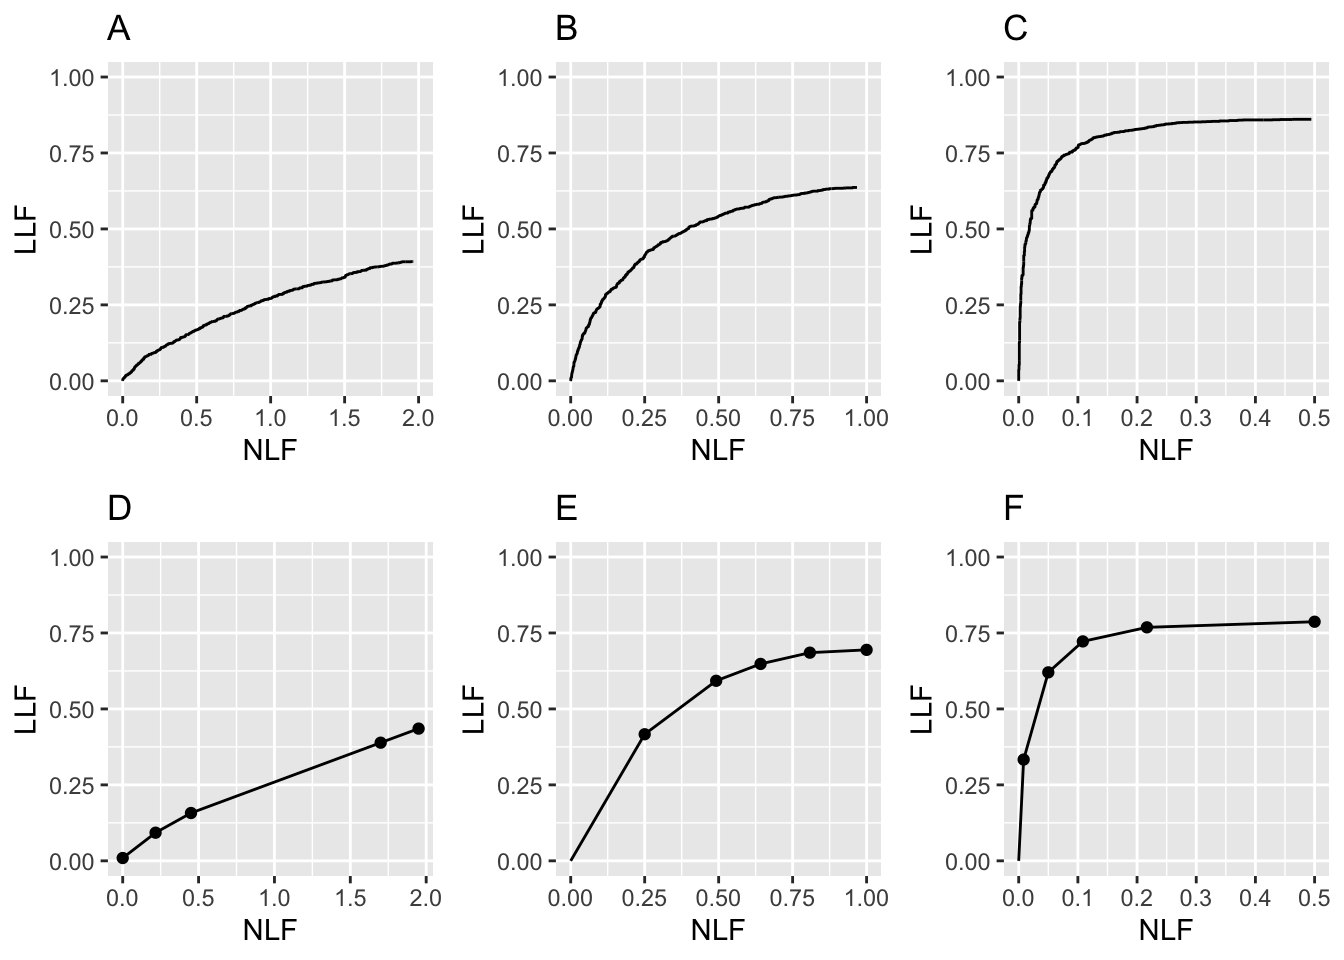 FROC plots: A, B, C correspond to raw population plots and D, E, F to binned plots with fewer cases.